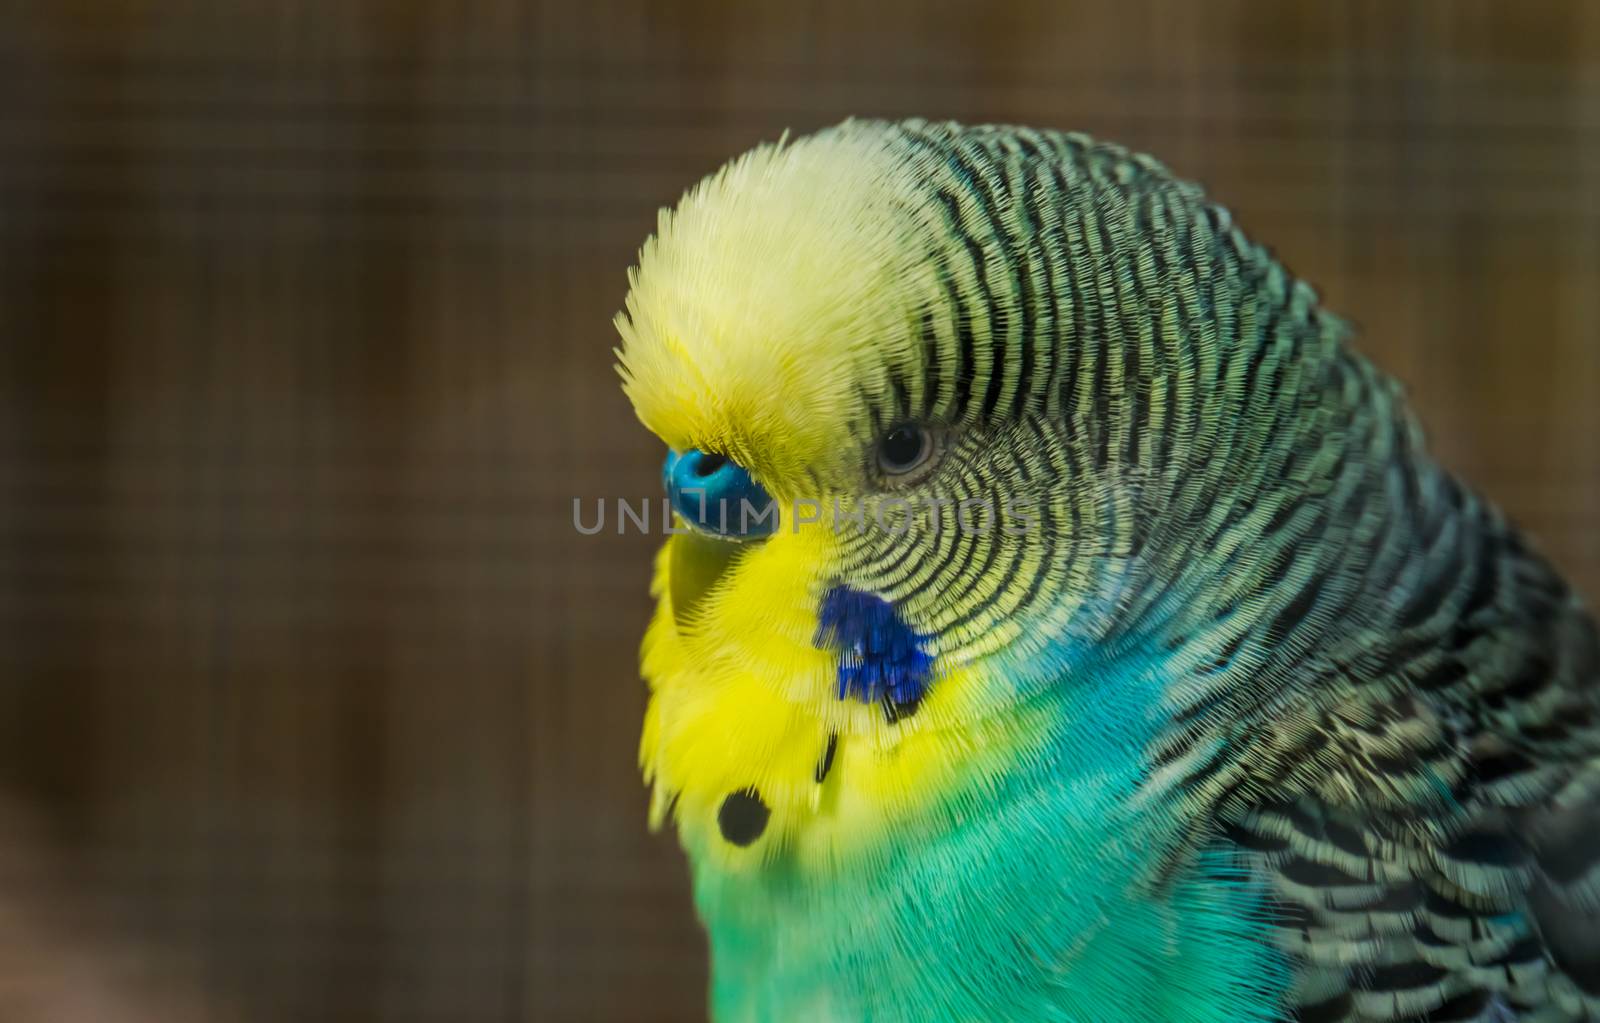 green and yellow budgie parakeet with its face in closeup, tropical bird specie from Australia